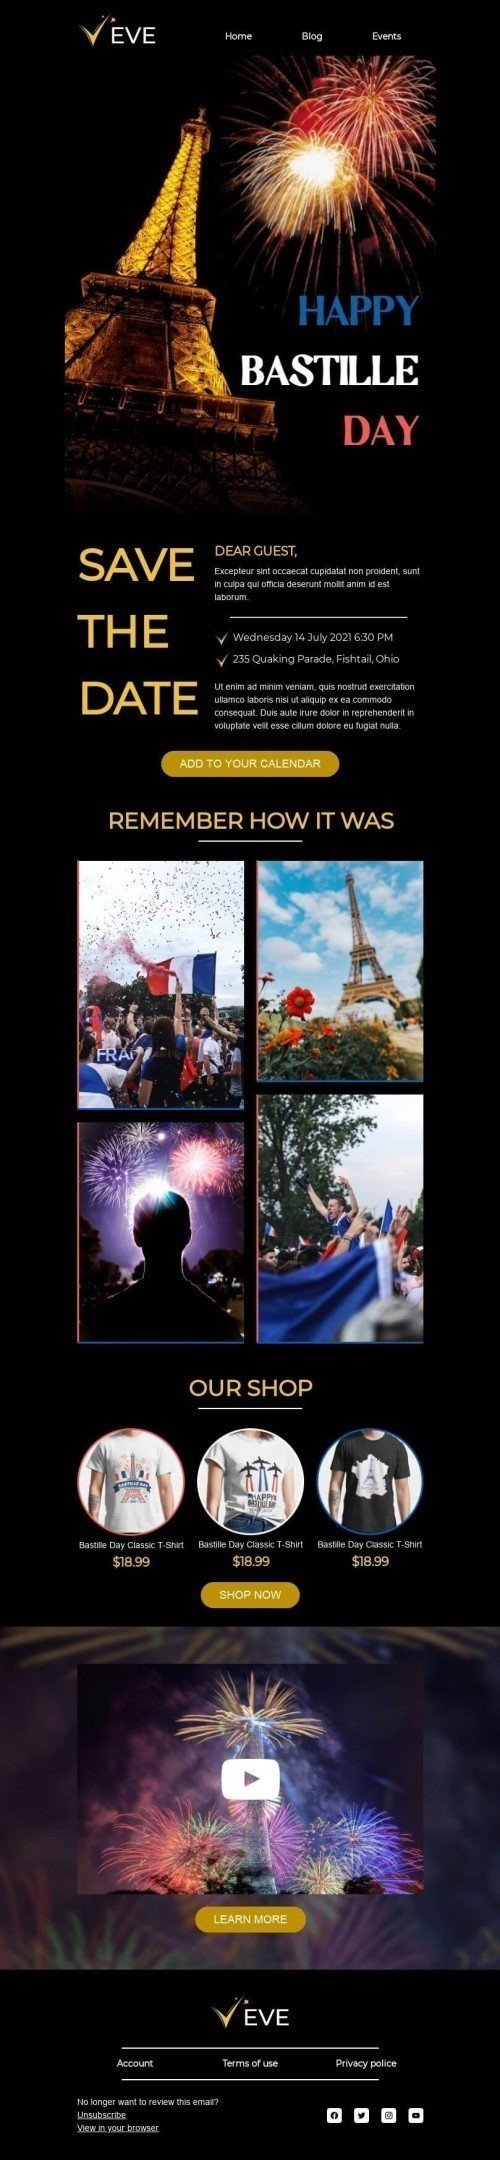 Bastille Day Email Template «Dear Guest» for Hobbies industry desktop view